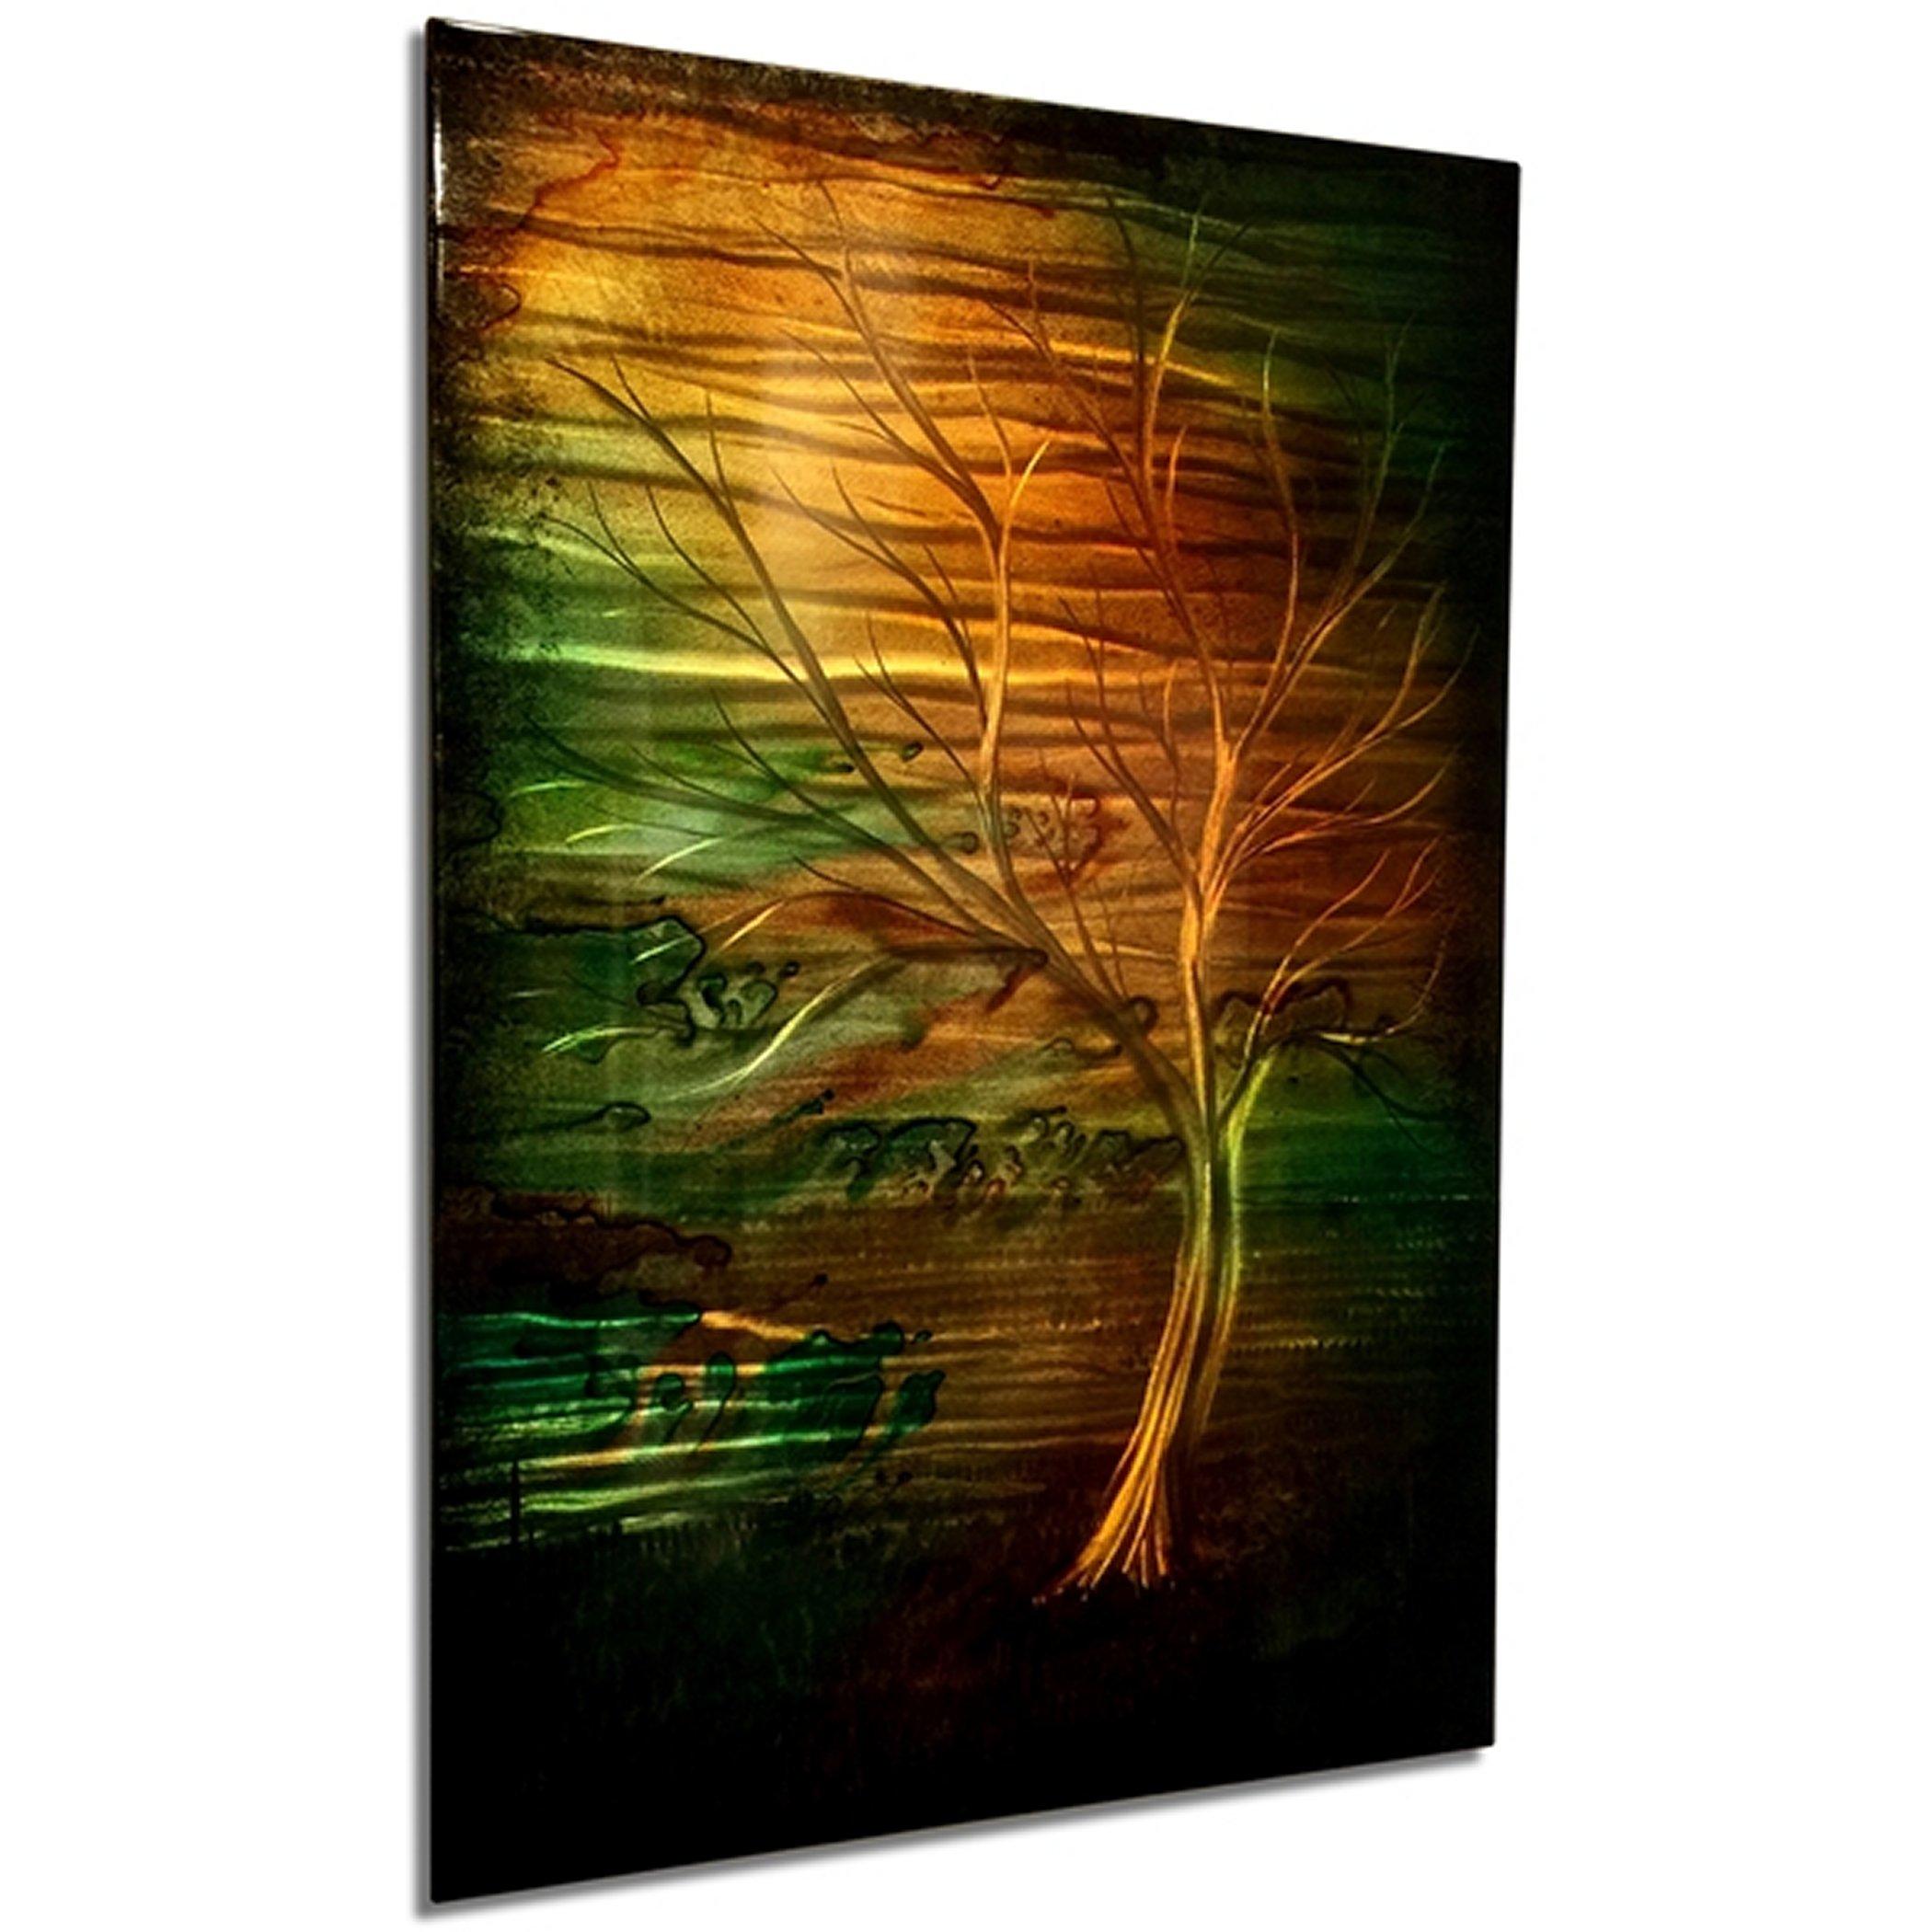 Large Abstract Metal Wall Art Industrial Modern Contemporary Tree Landscape 